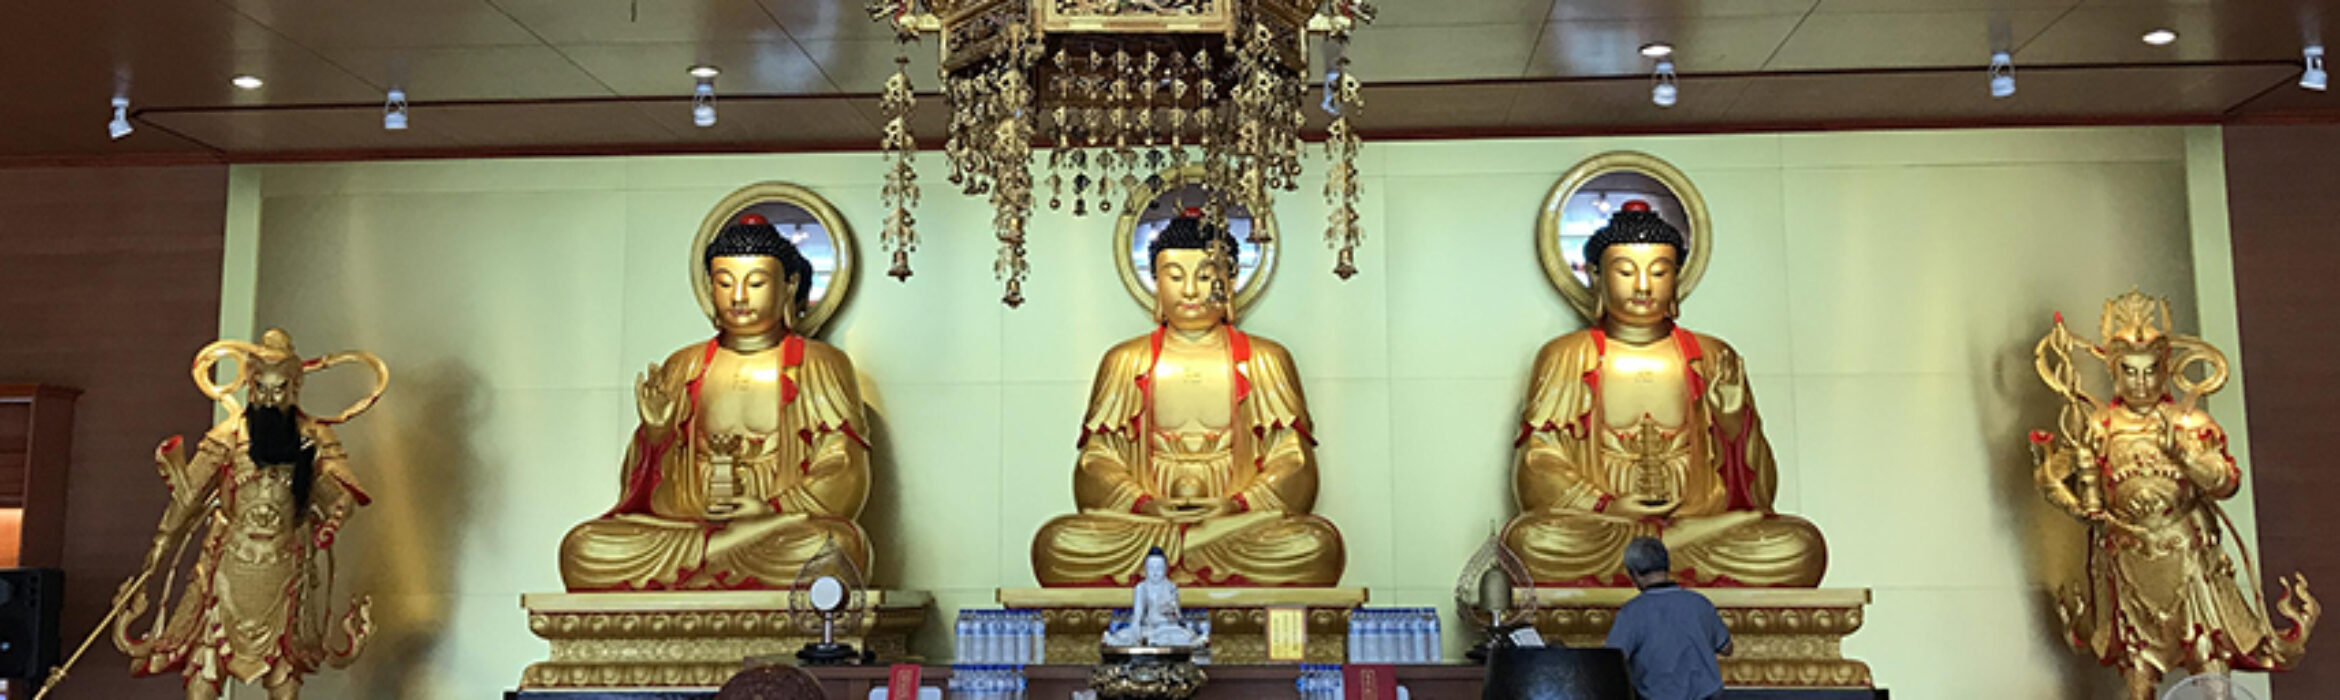 Conference: Identity and Networks in Buddhism and East Asian Religions